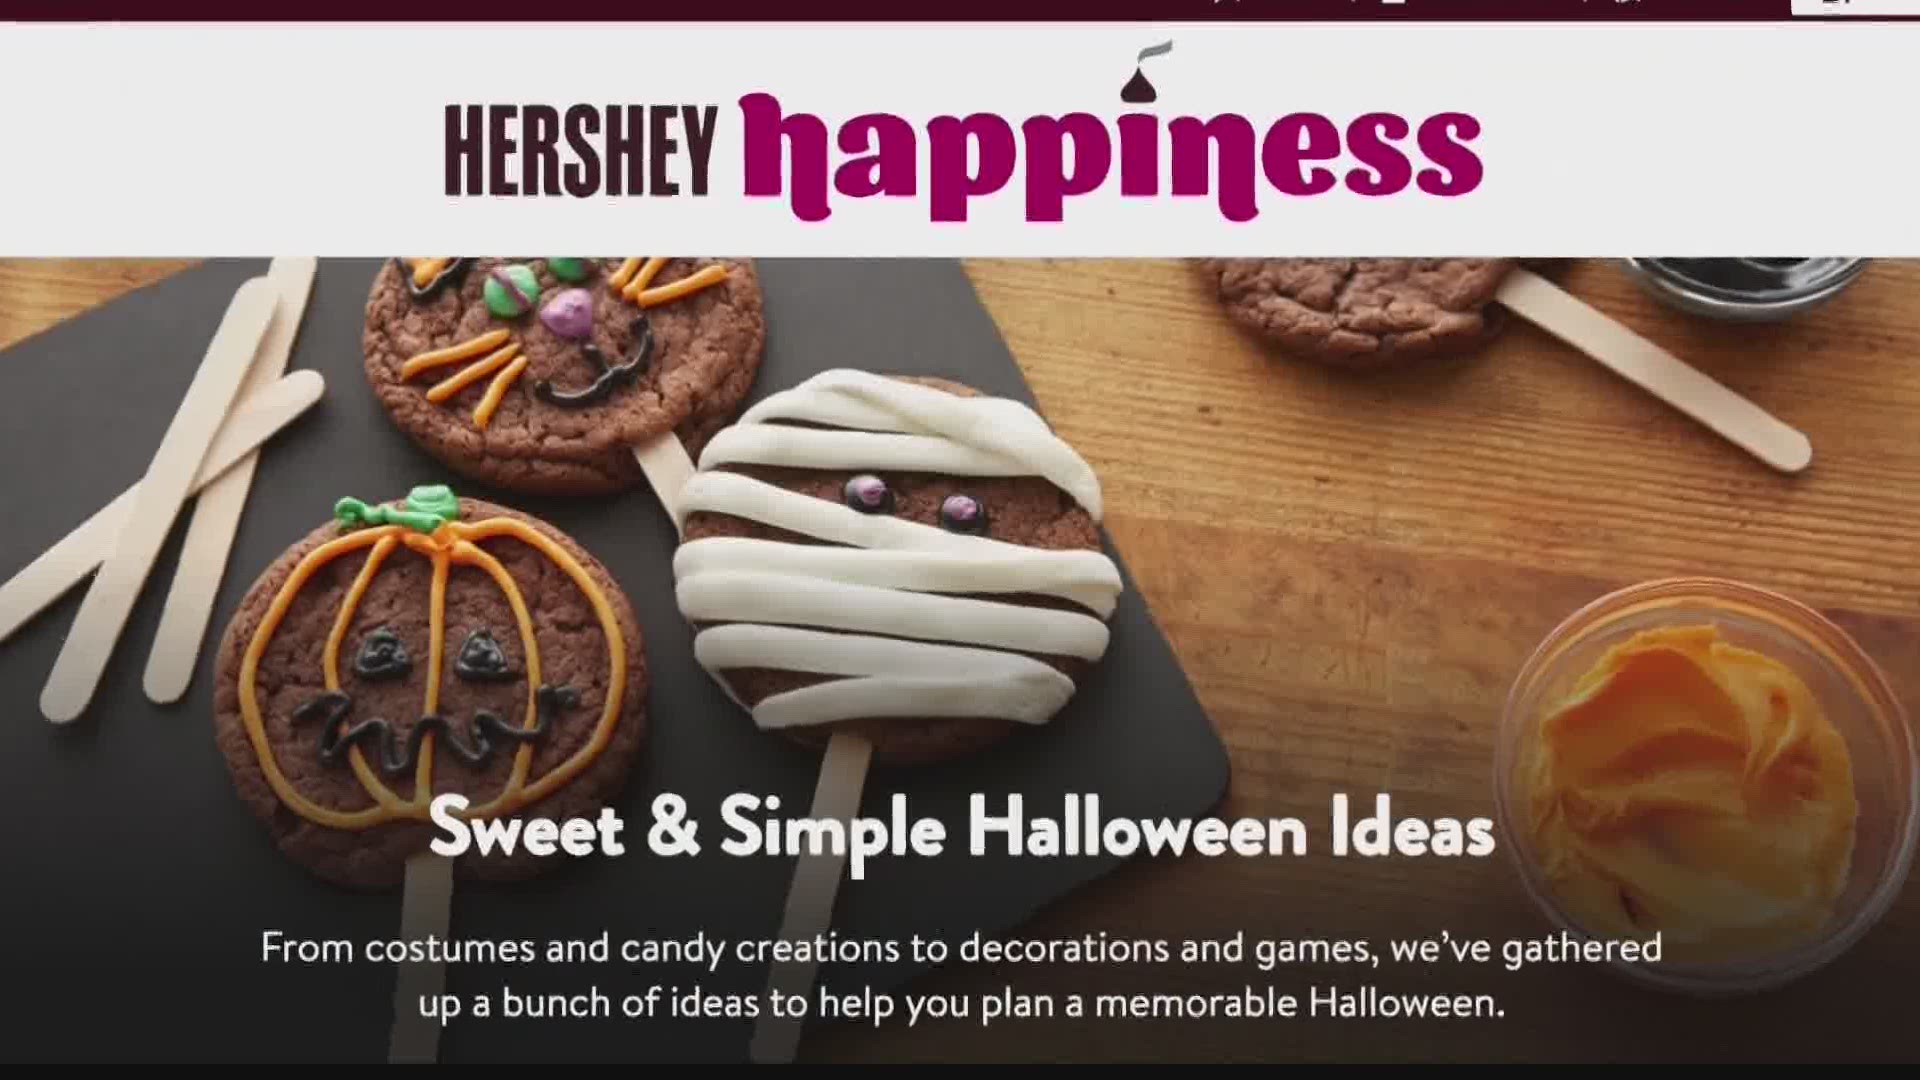 Halloween may be different in 2020, but Hershey wants to make sure it is still full of fun and treats!